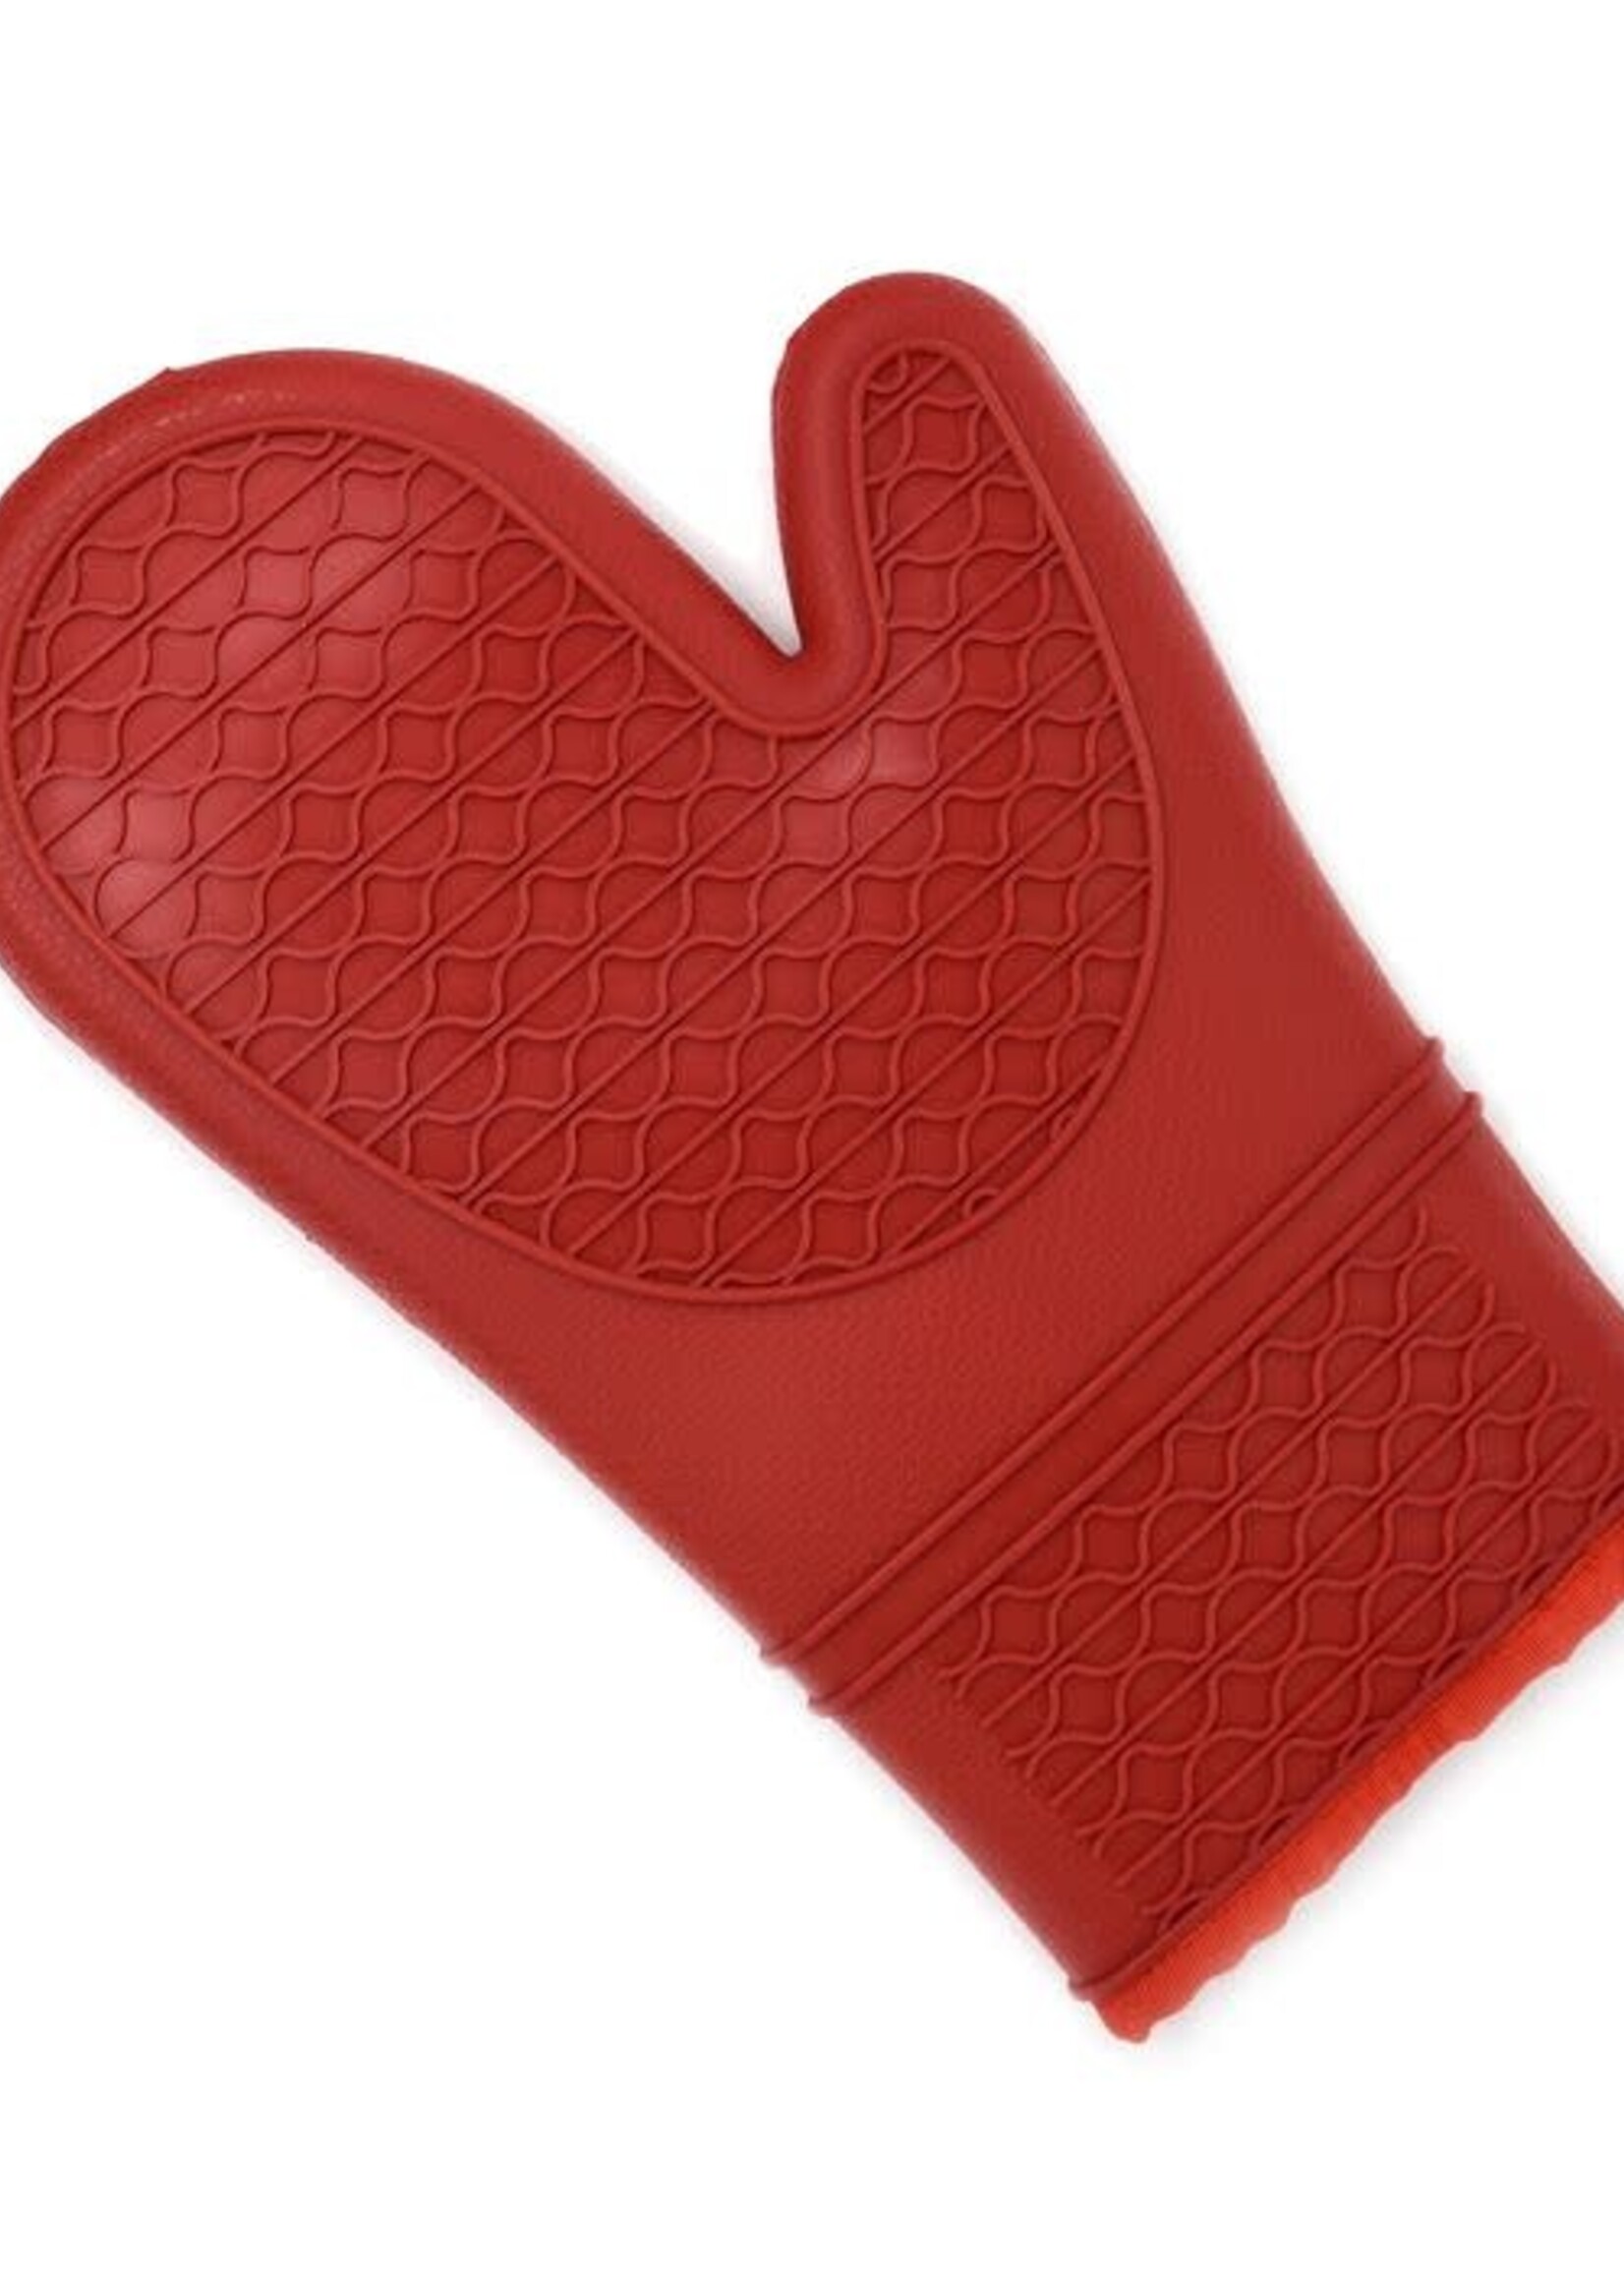 Norpro Silicone/Fabric Glove Red Med